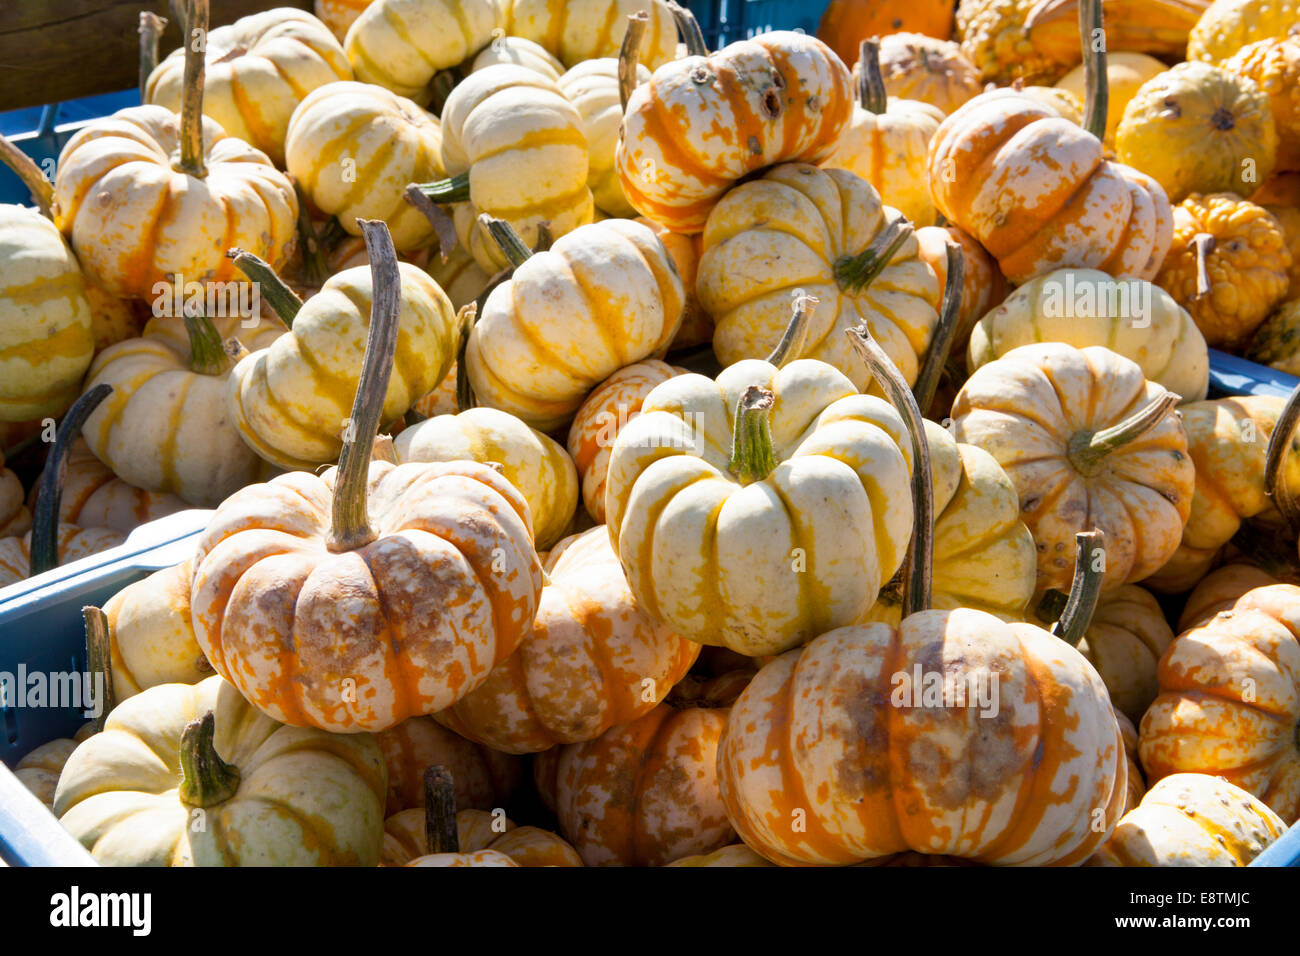 Ornamental gourd variety, Different pumpkins for decoration and cooking, Germany, Europe, Stock Photo